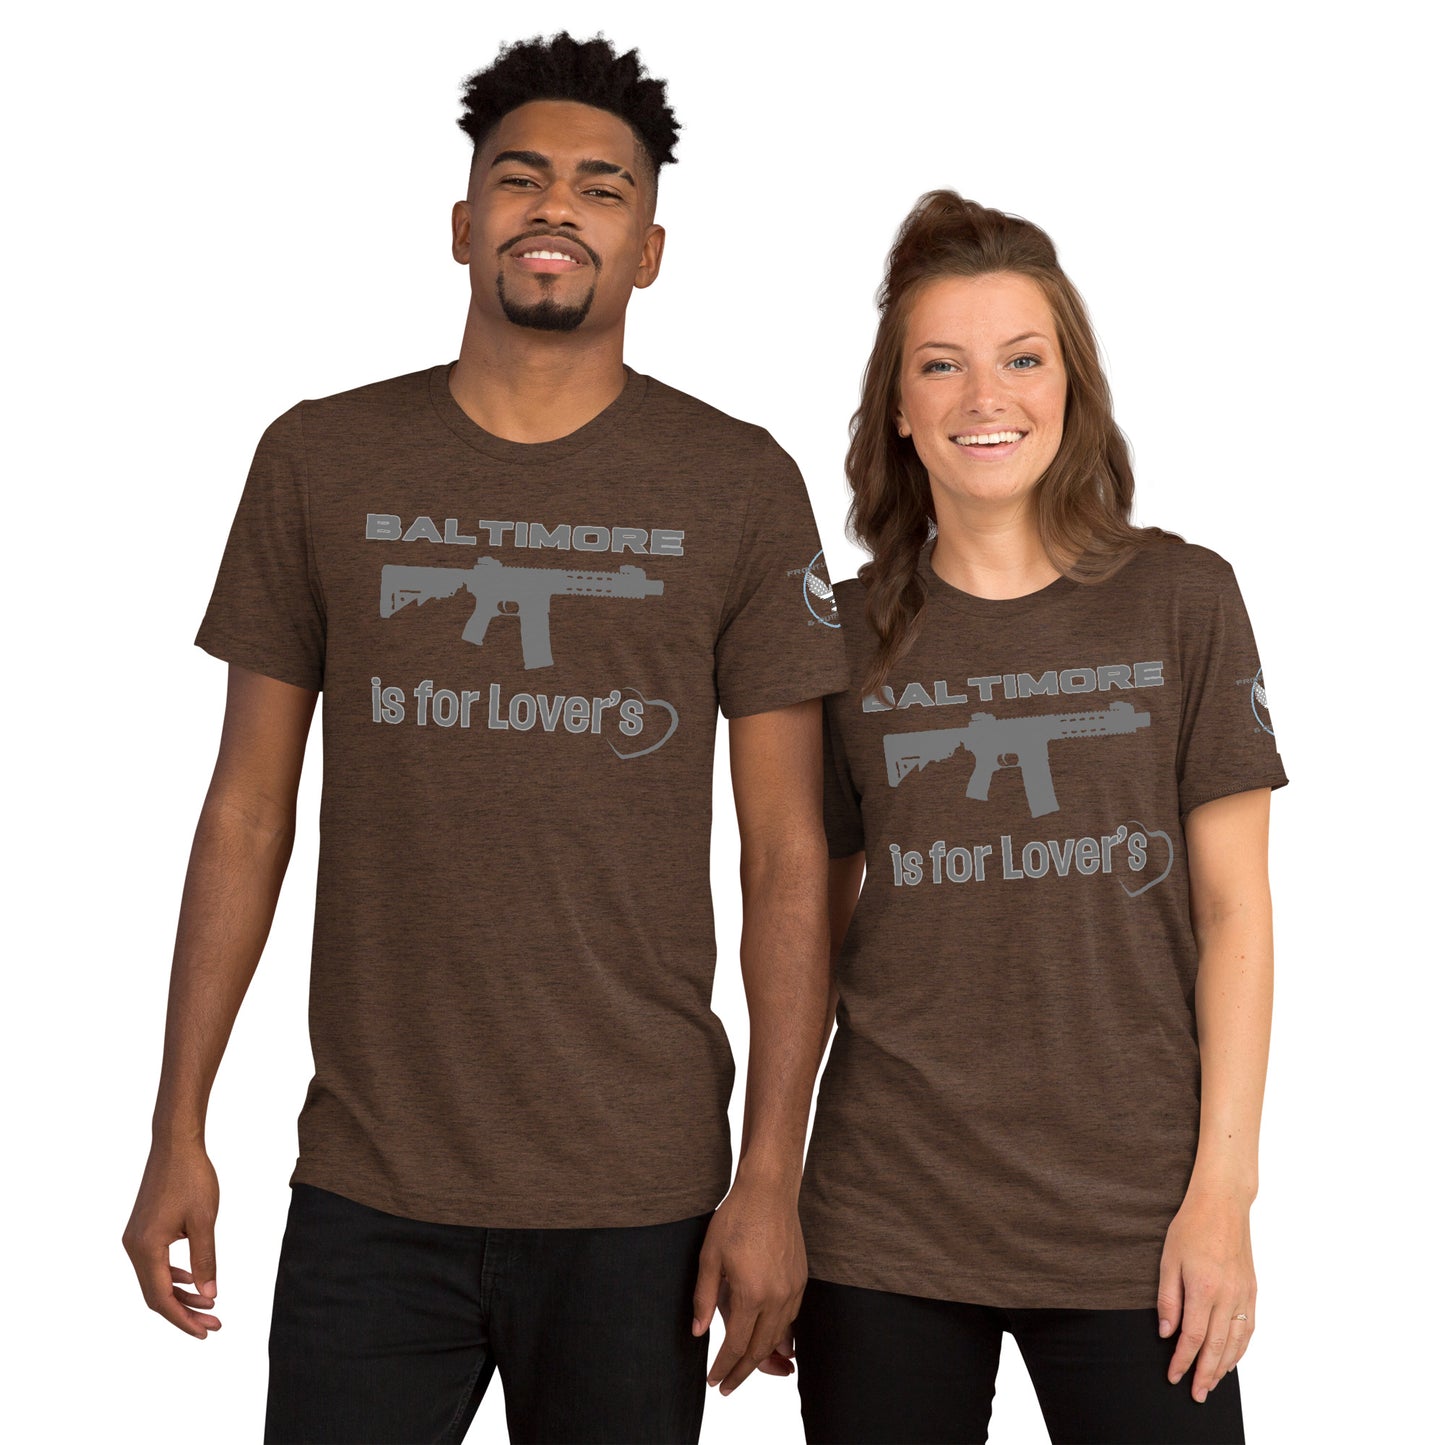 Baltimore is for Lover's Gray'd Out t-shirt